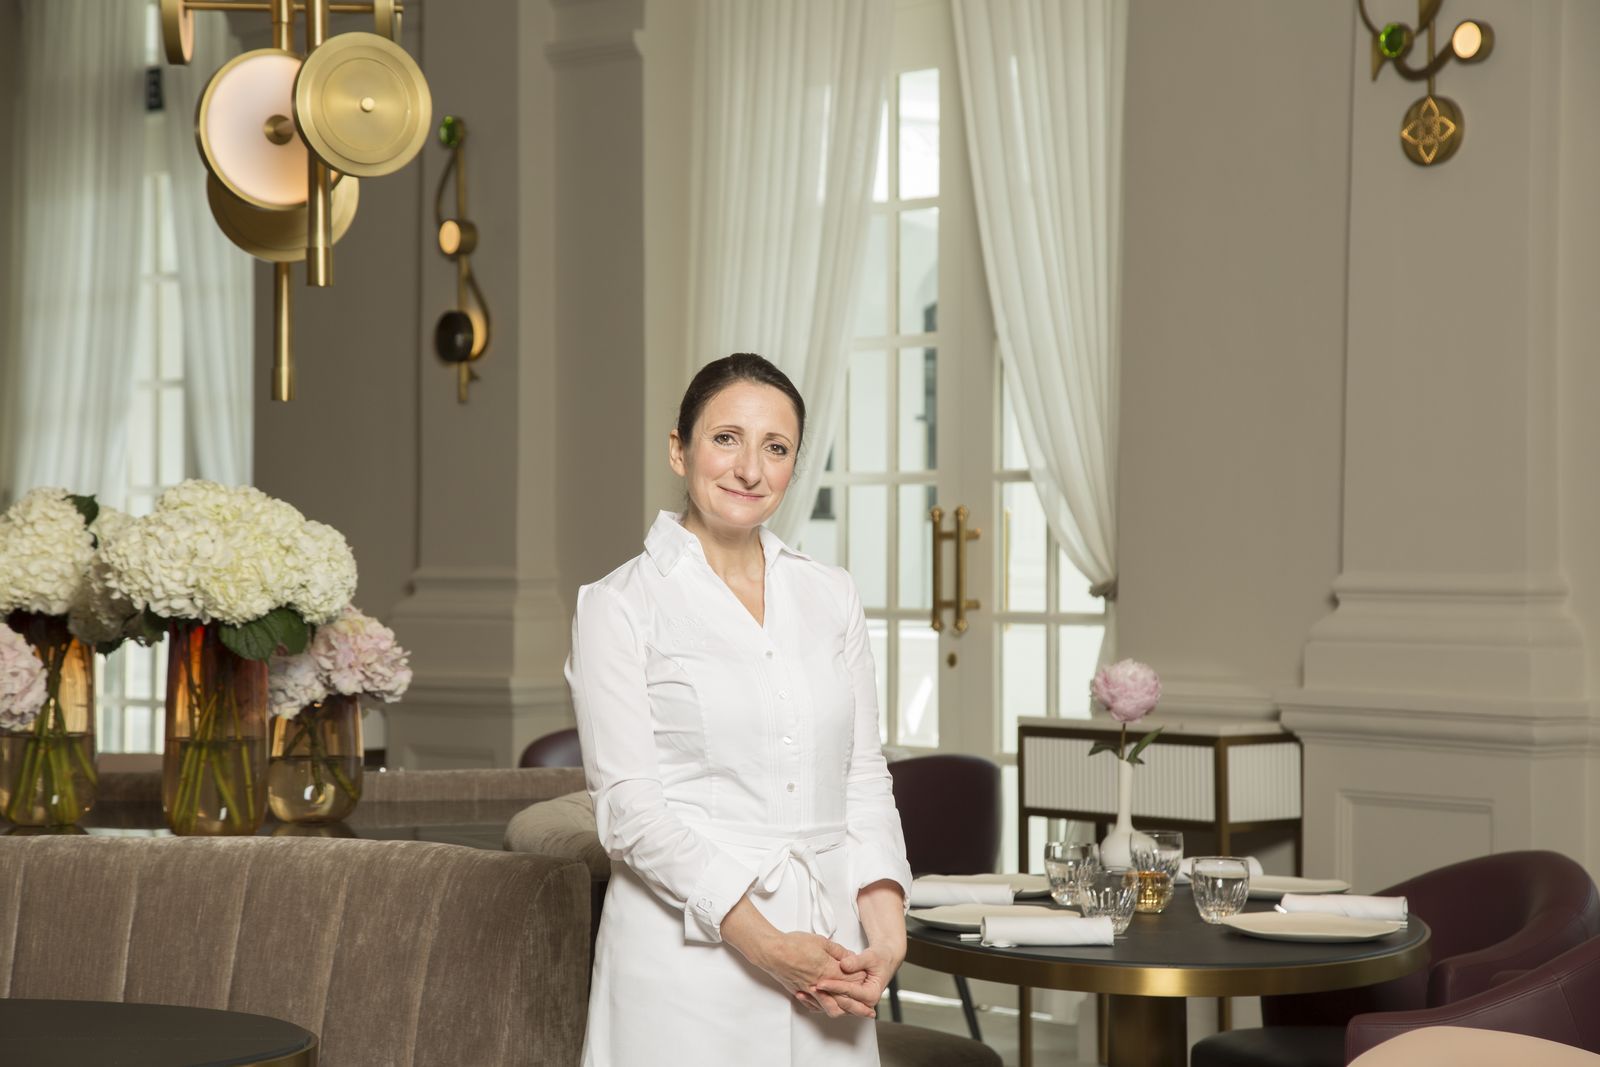 Michelin-starred chef Anne-Sophie Pic makes Asia debut at Raffles Singapore